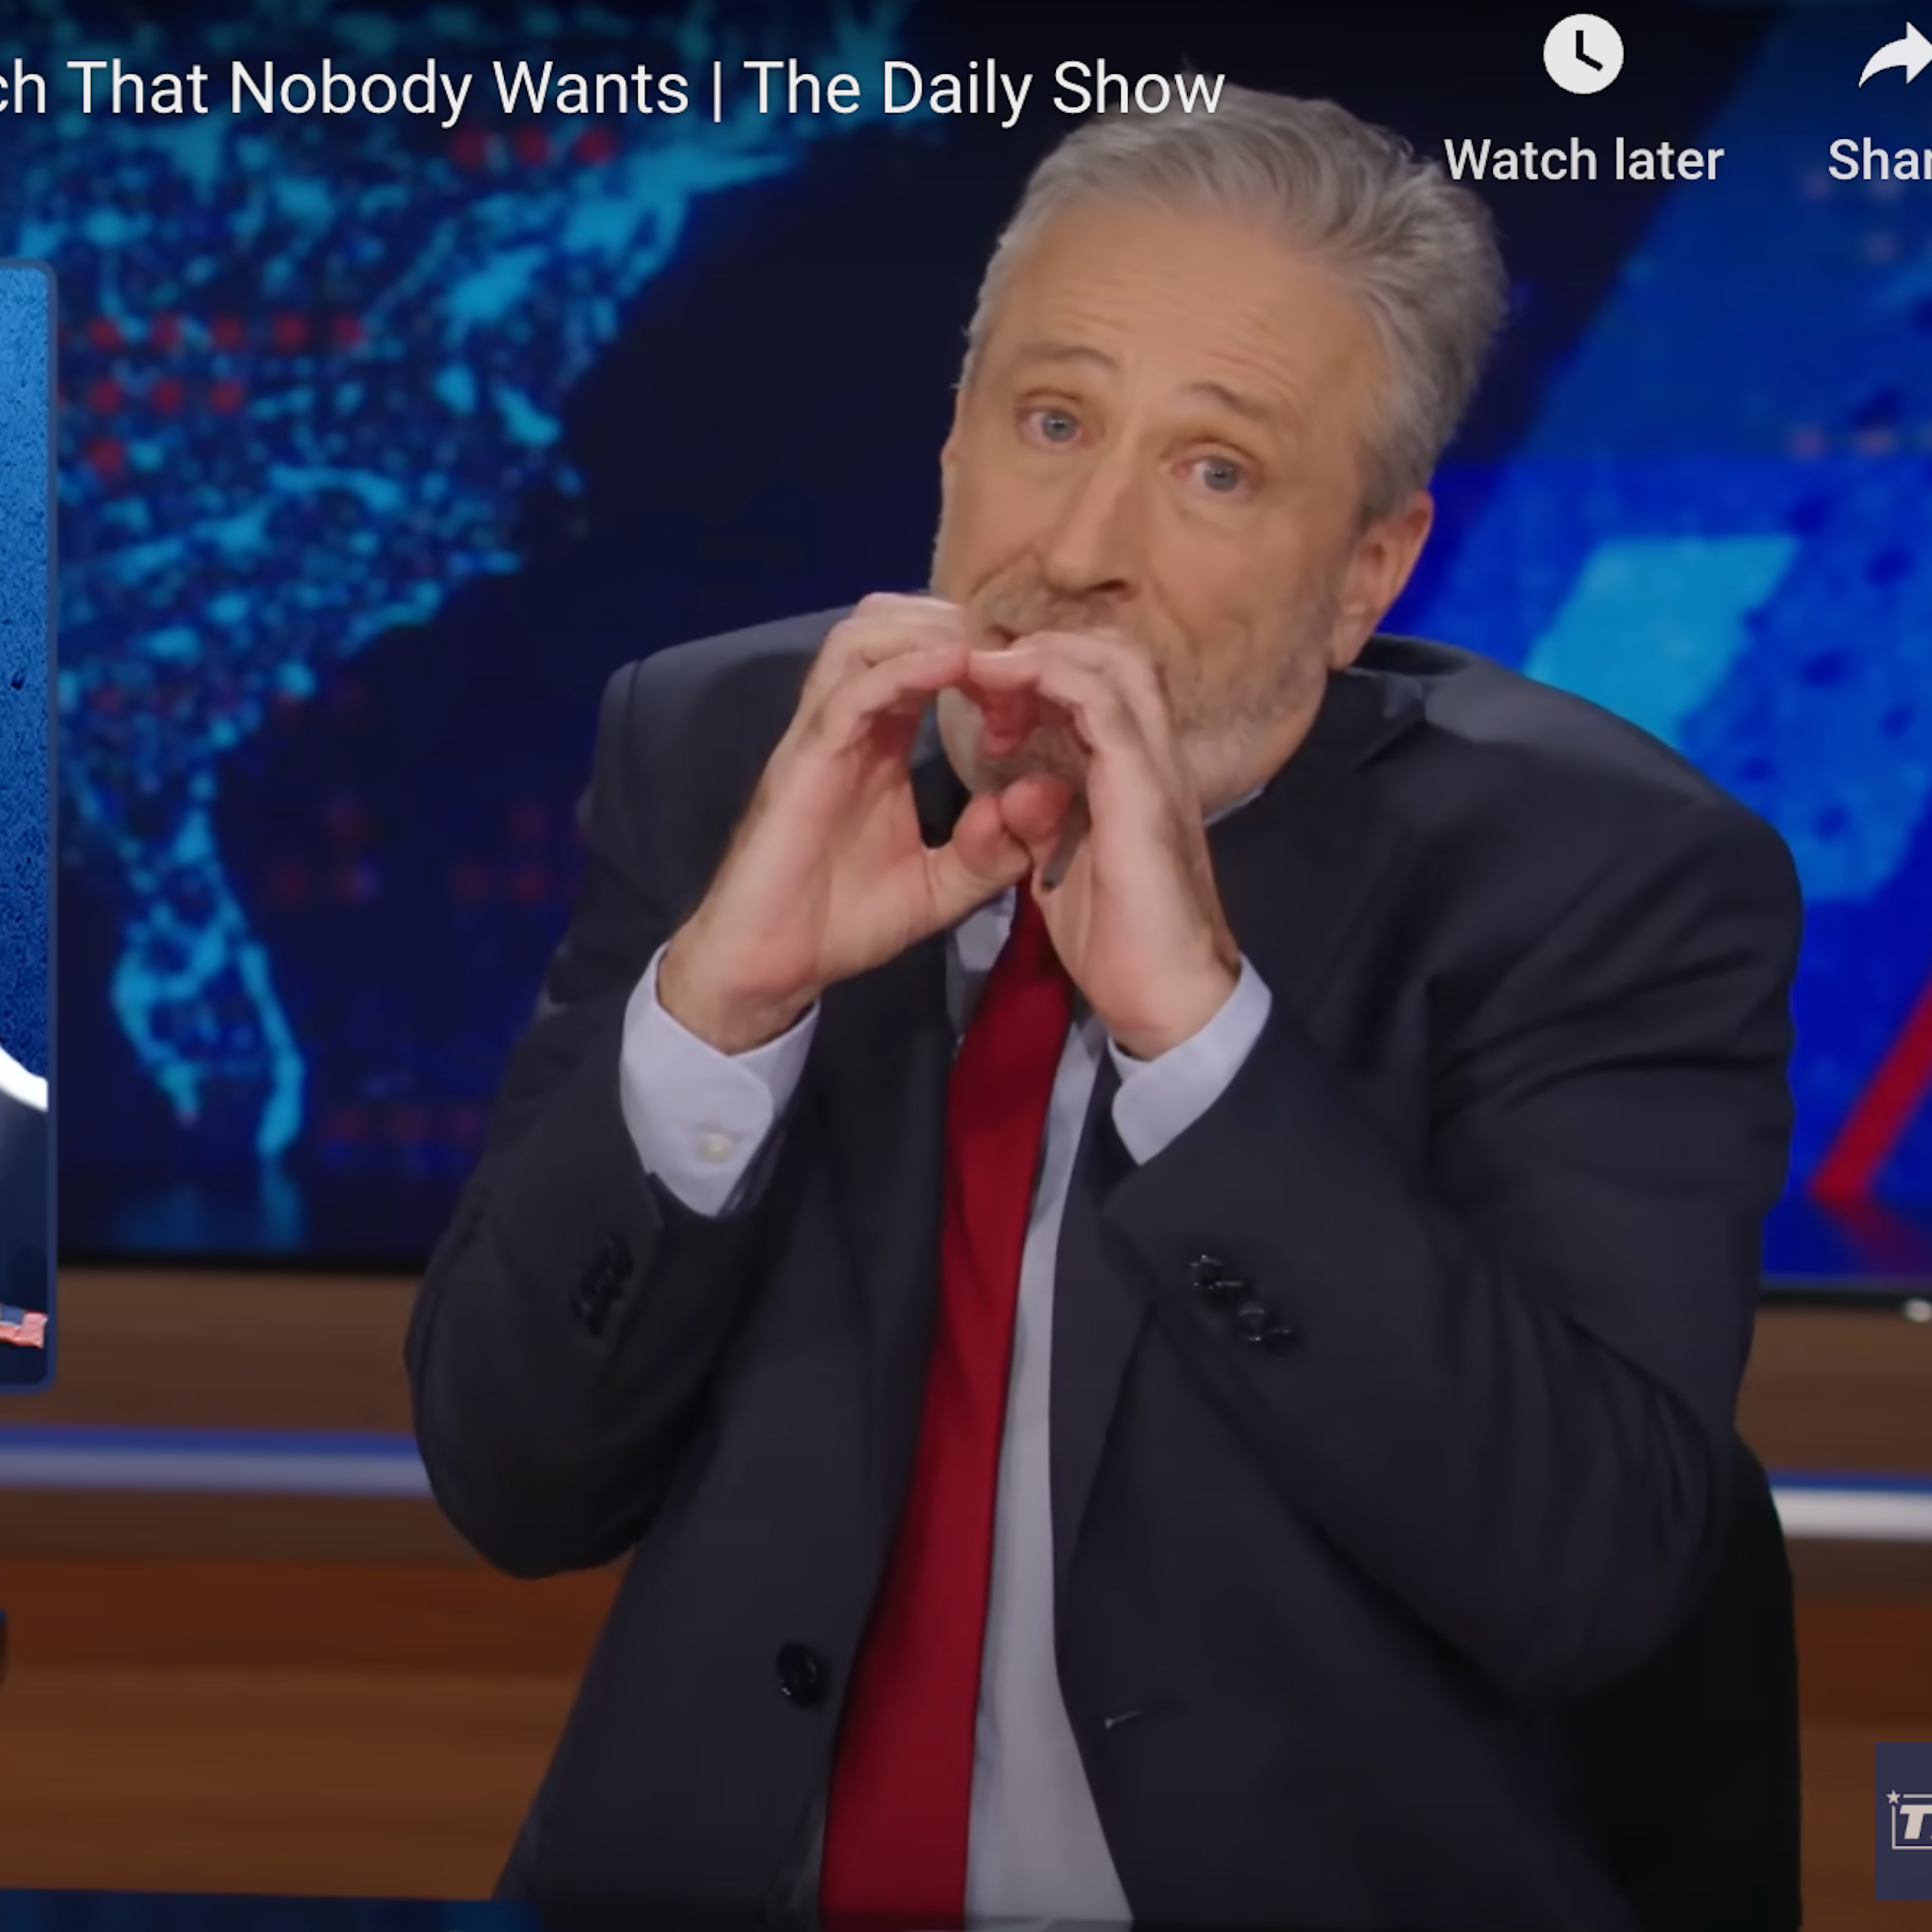 Jon Stewart, still a 'tiny, neurotic man,' back to remind Americans what's at stake